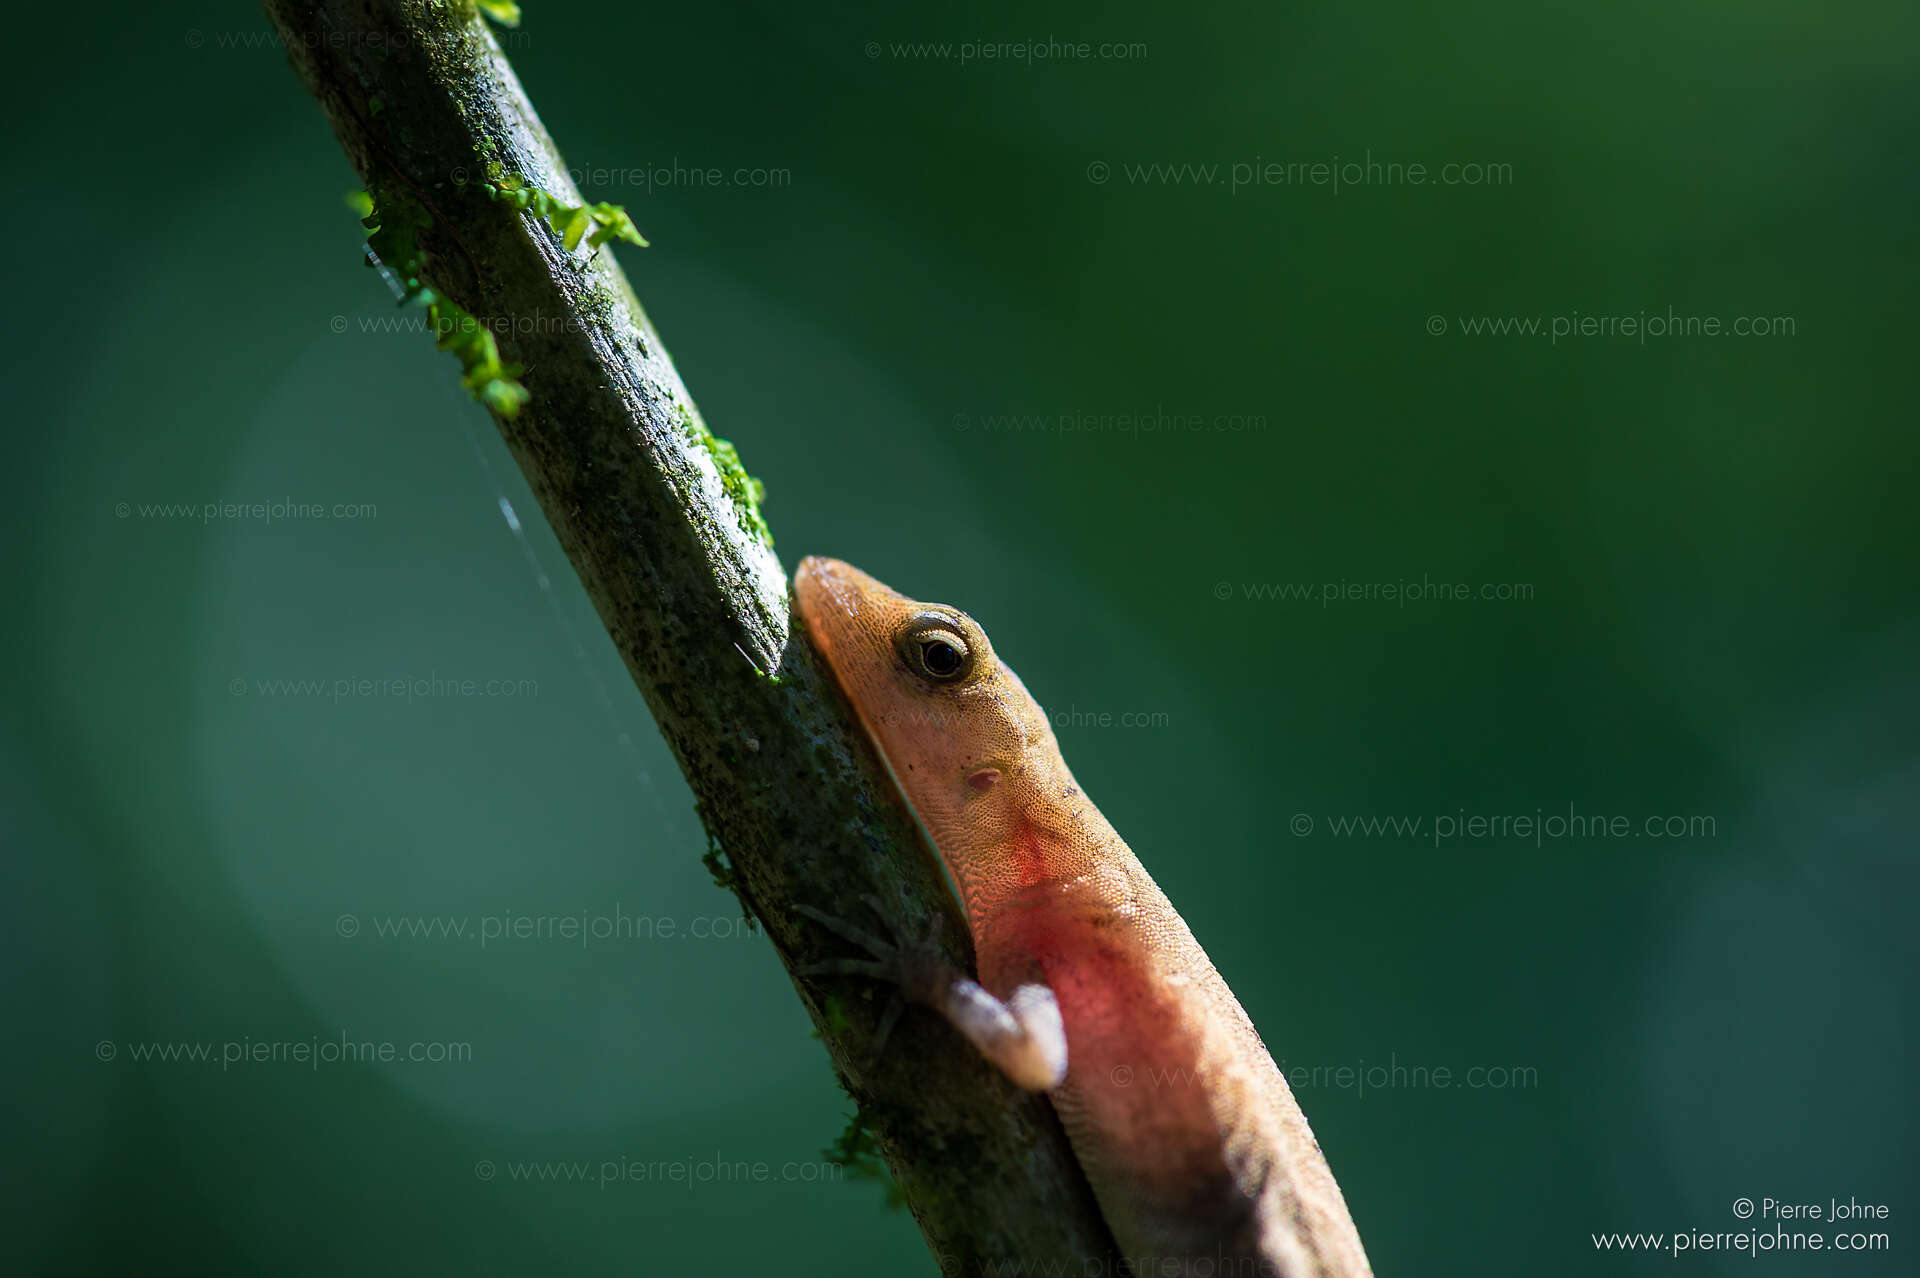 A nearly transparent gecko at the top of the Madera Volcano, Ometepe, Nicaragua